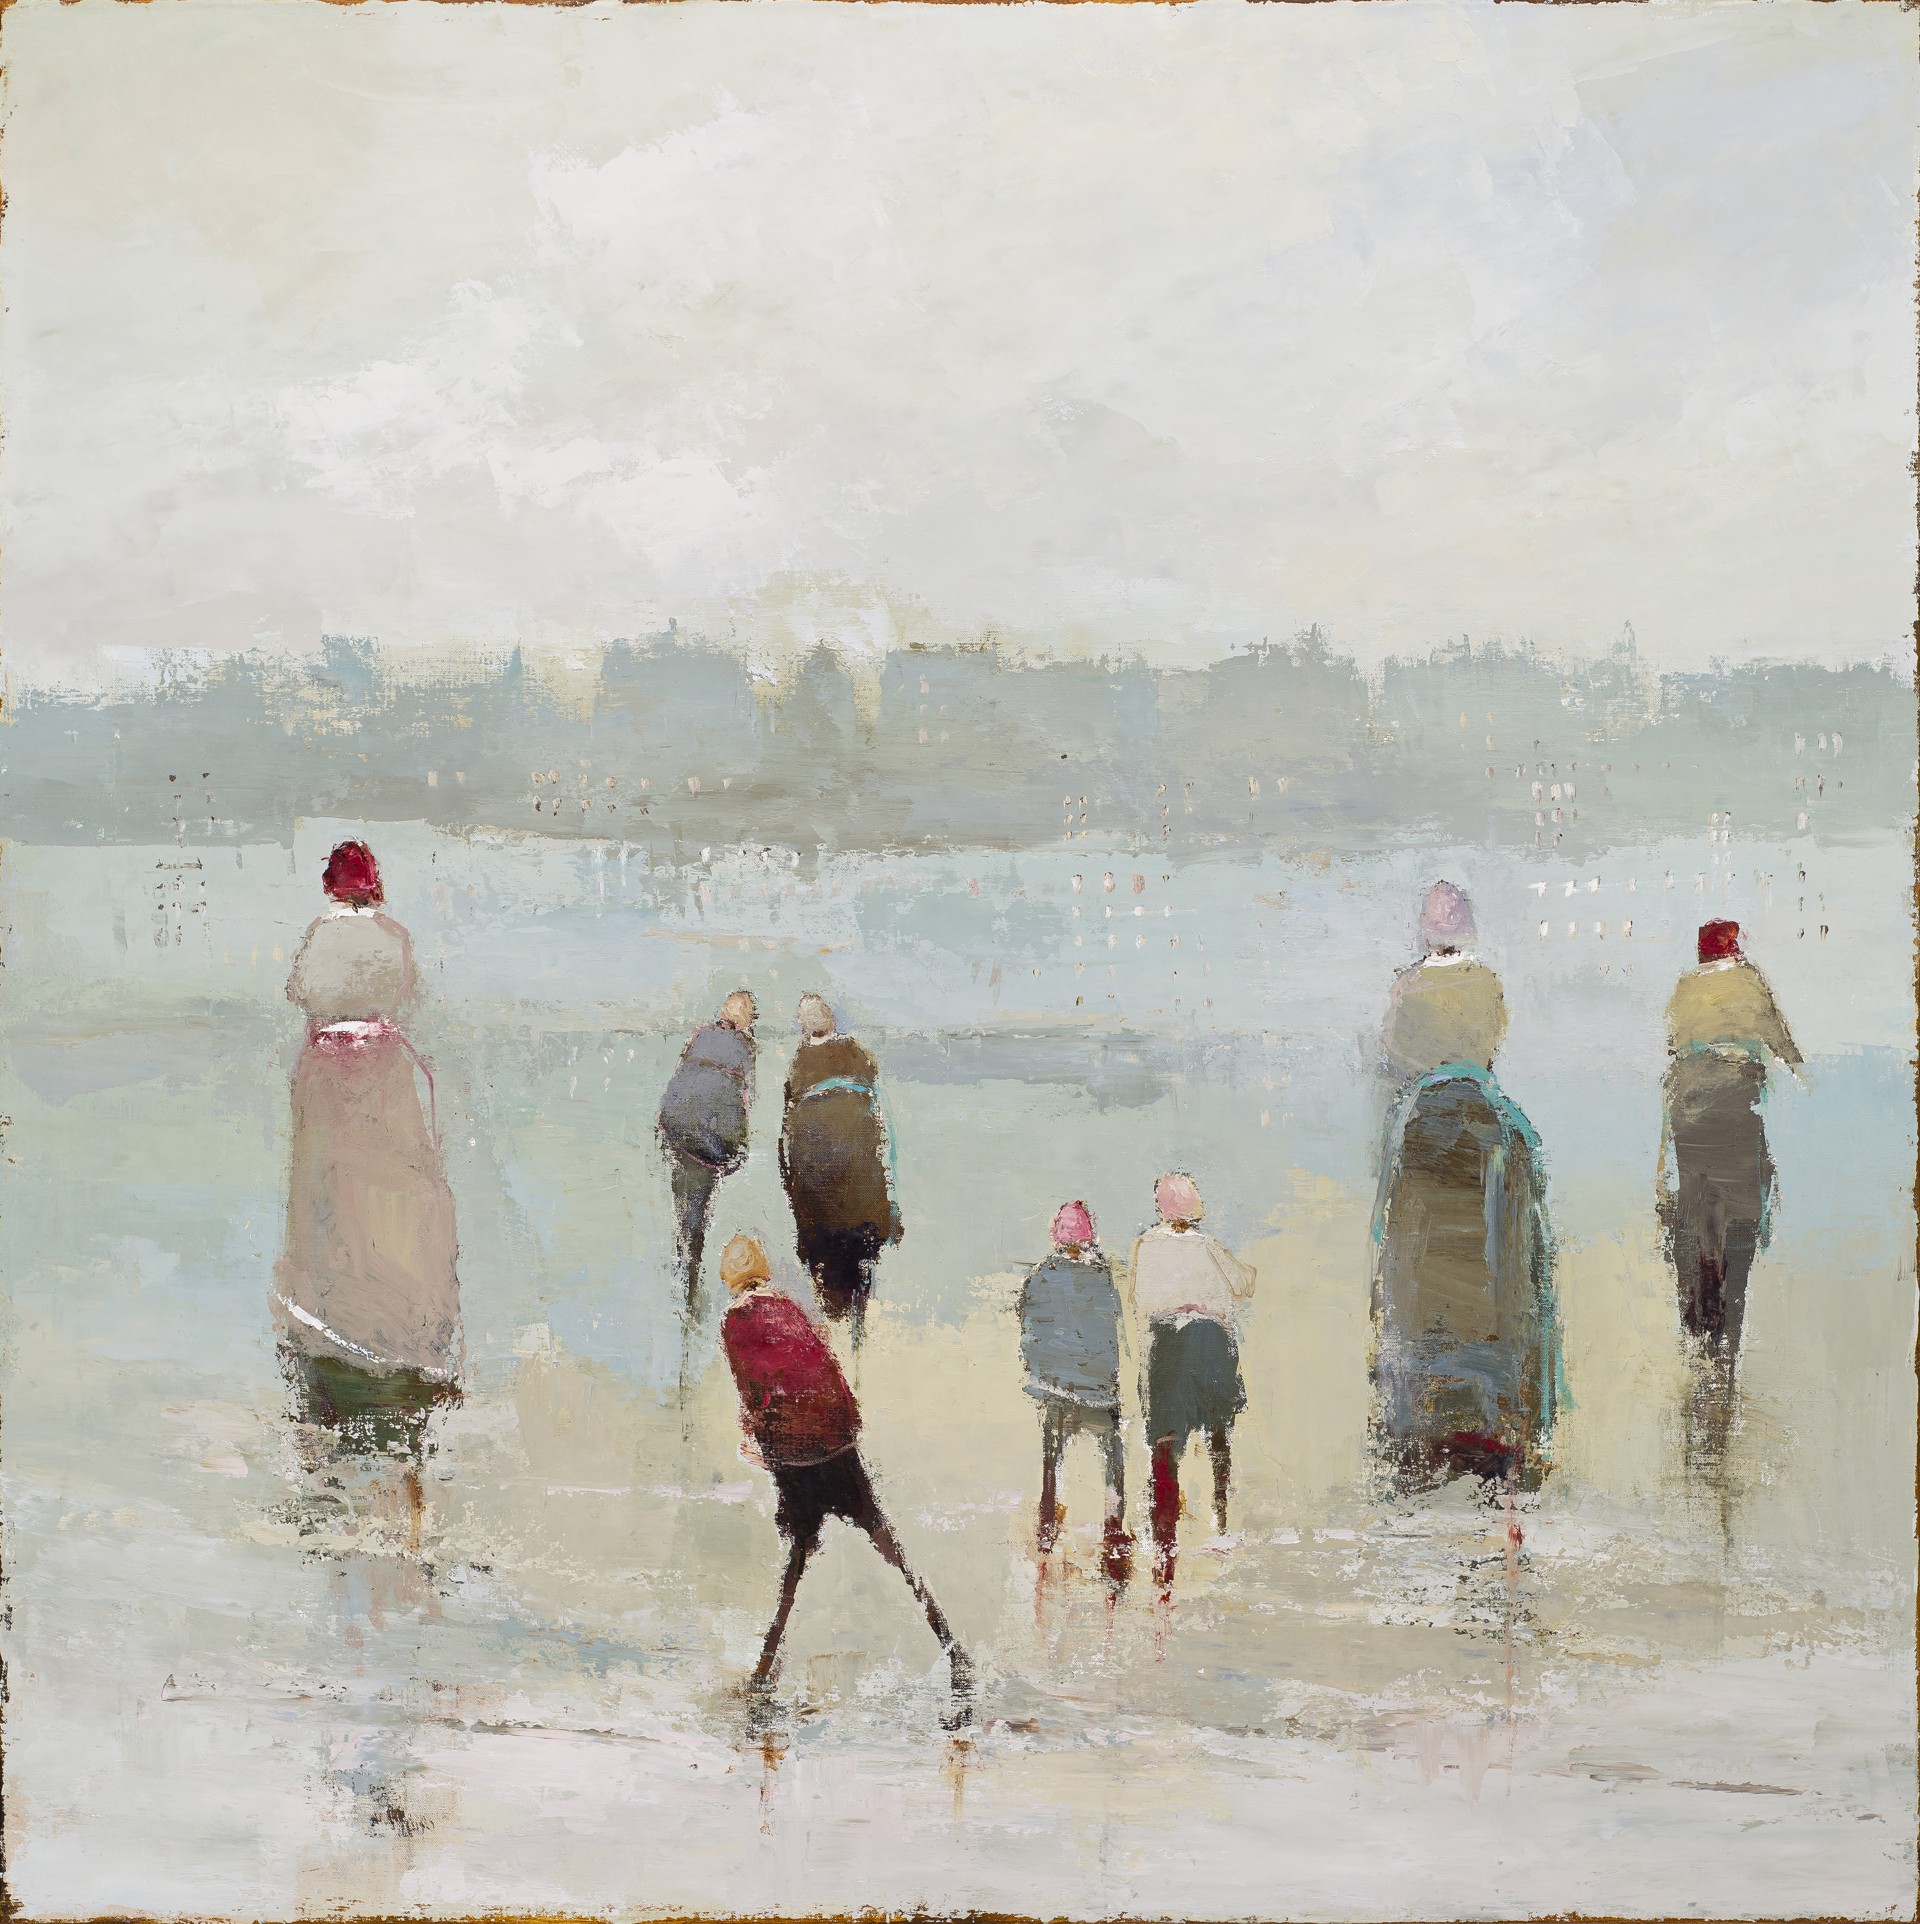 The sweet sharp sense of a fugitive day by France Jodoin